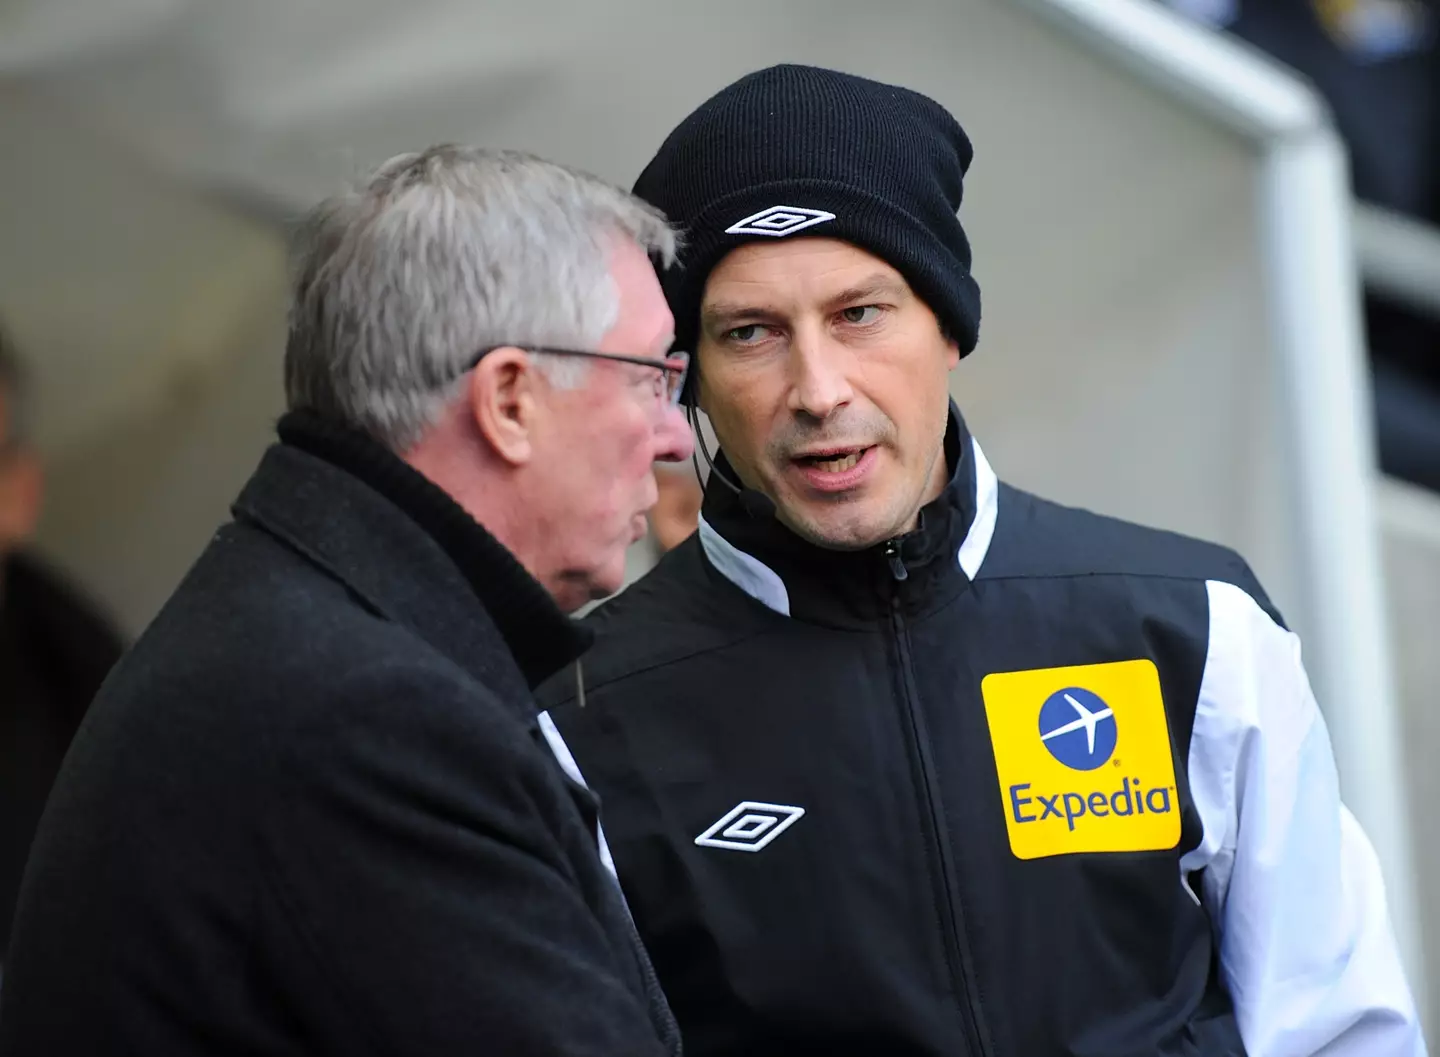 Former Manchester United manager Sir Alex Ferguson called Mark Clattenburg to offer him his full support